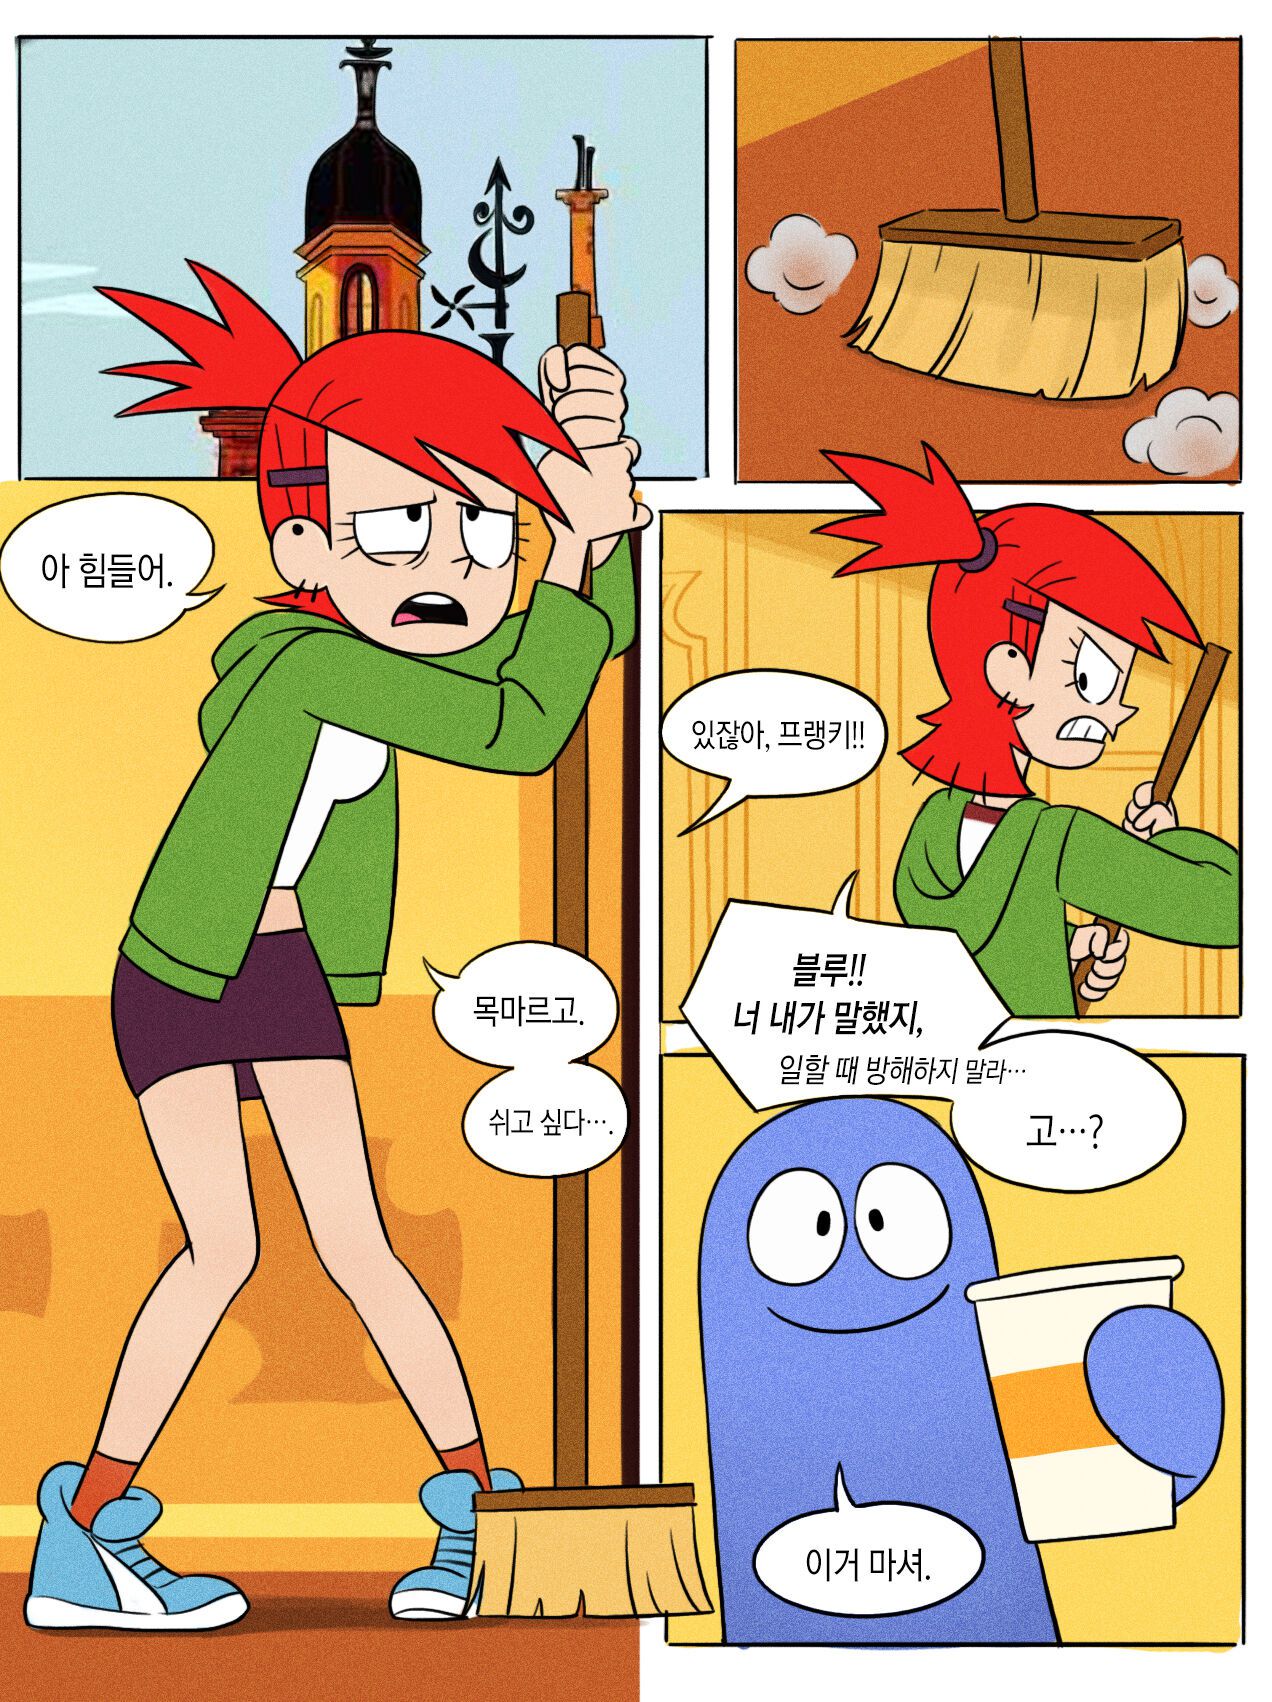 [Mangamaster] Frankie Foster (Foster's Home For Imaginary Friends) [Korean] 1